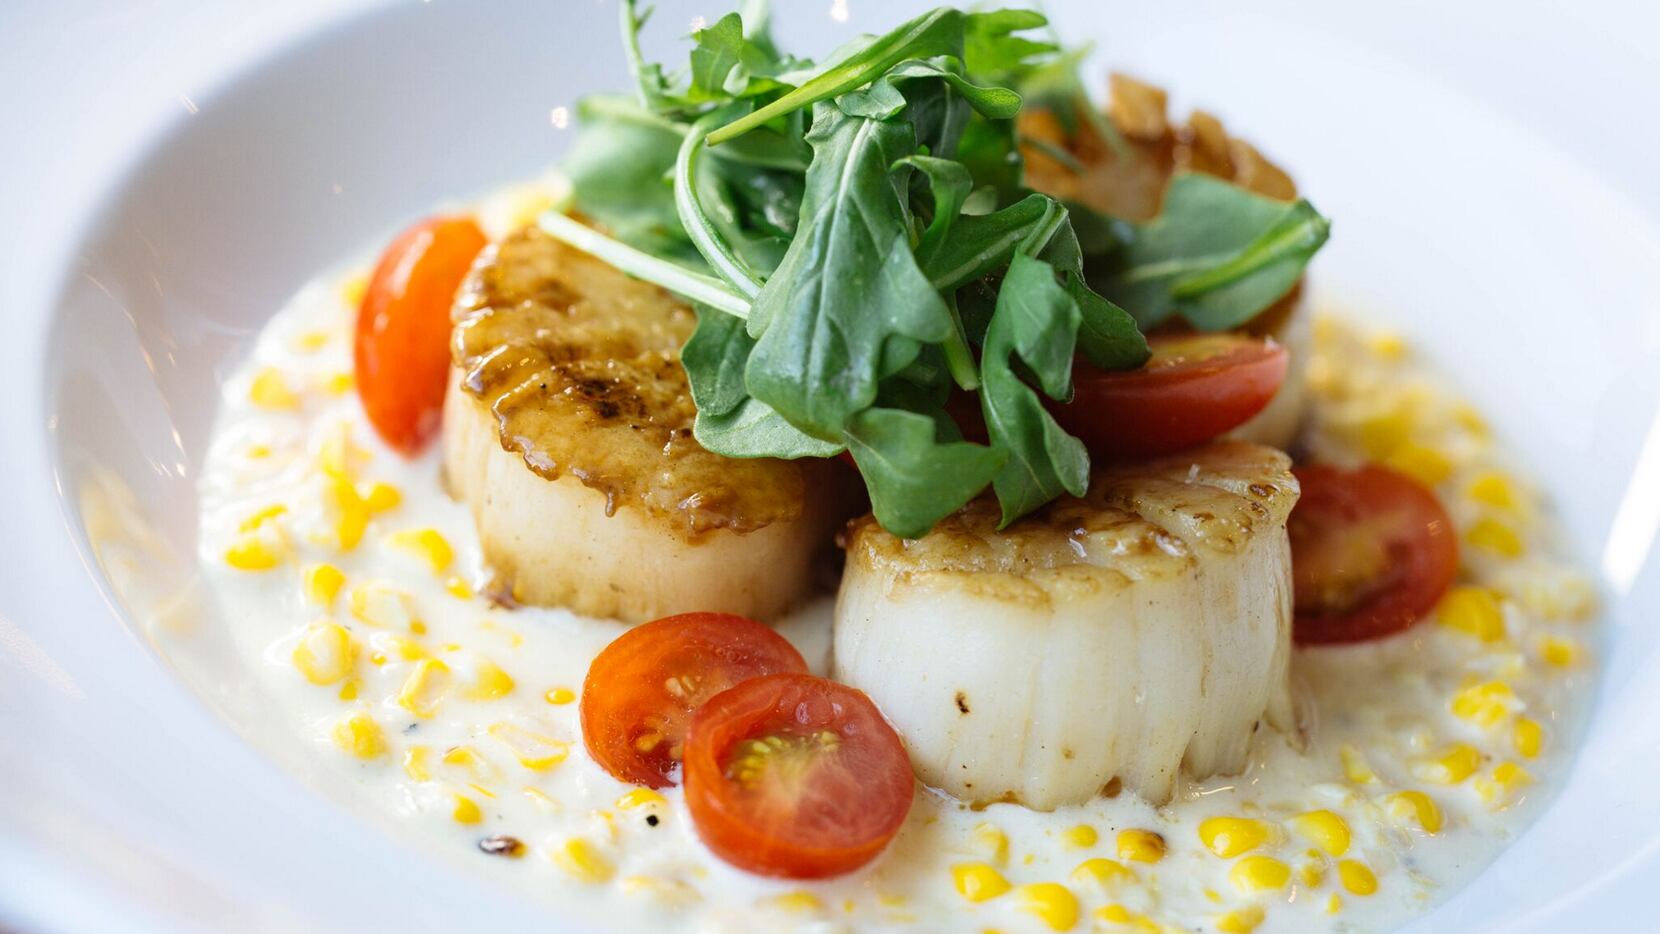 Sugarbacon Proper Kitchen sells dishes like Gulf scallops (pictured) and shrimp and grits.